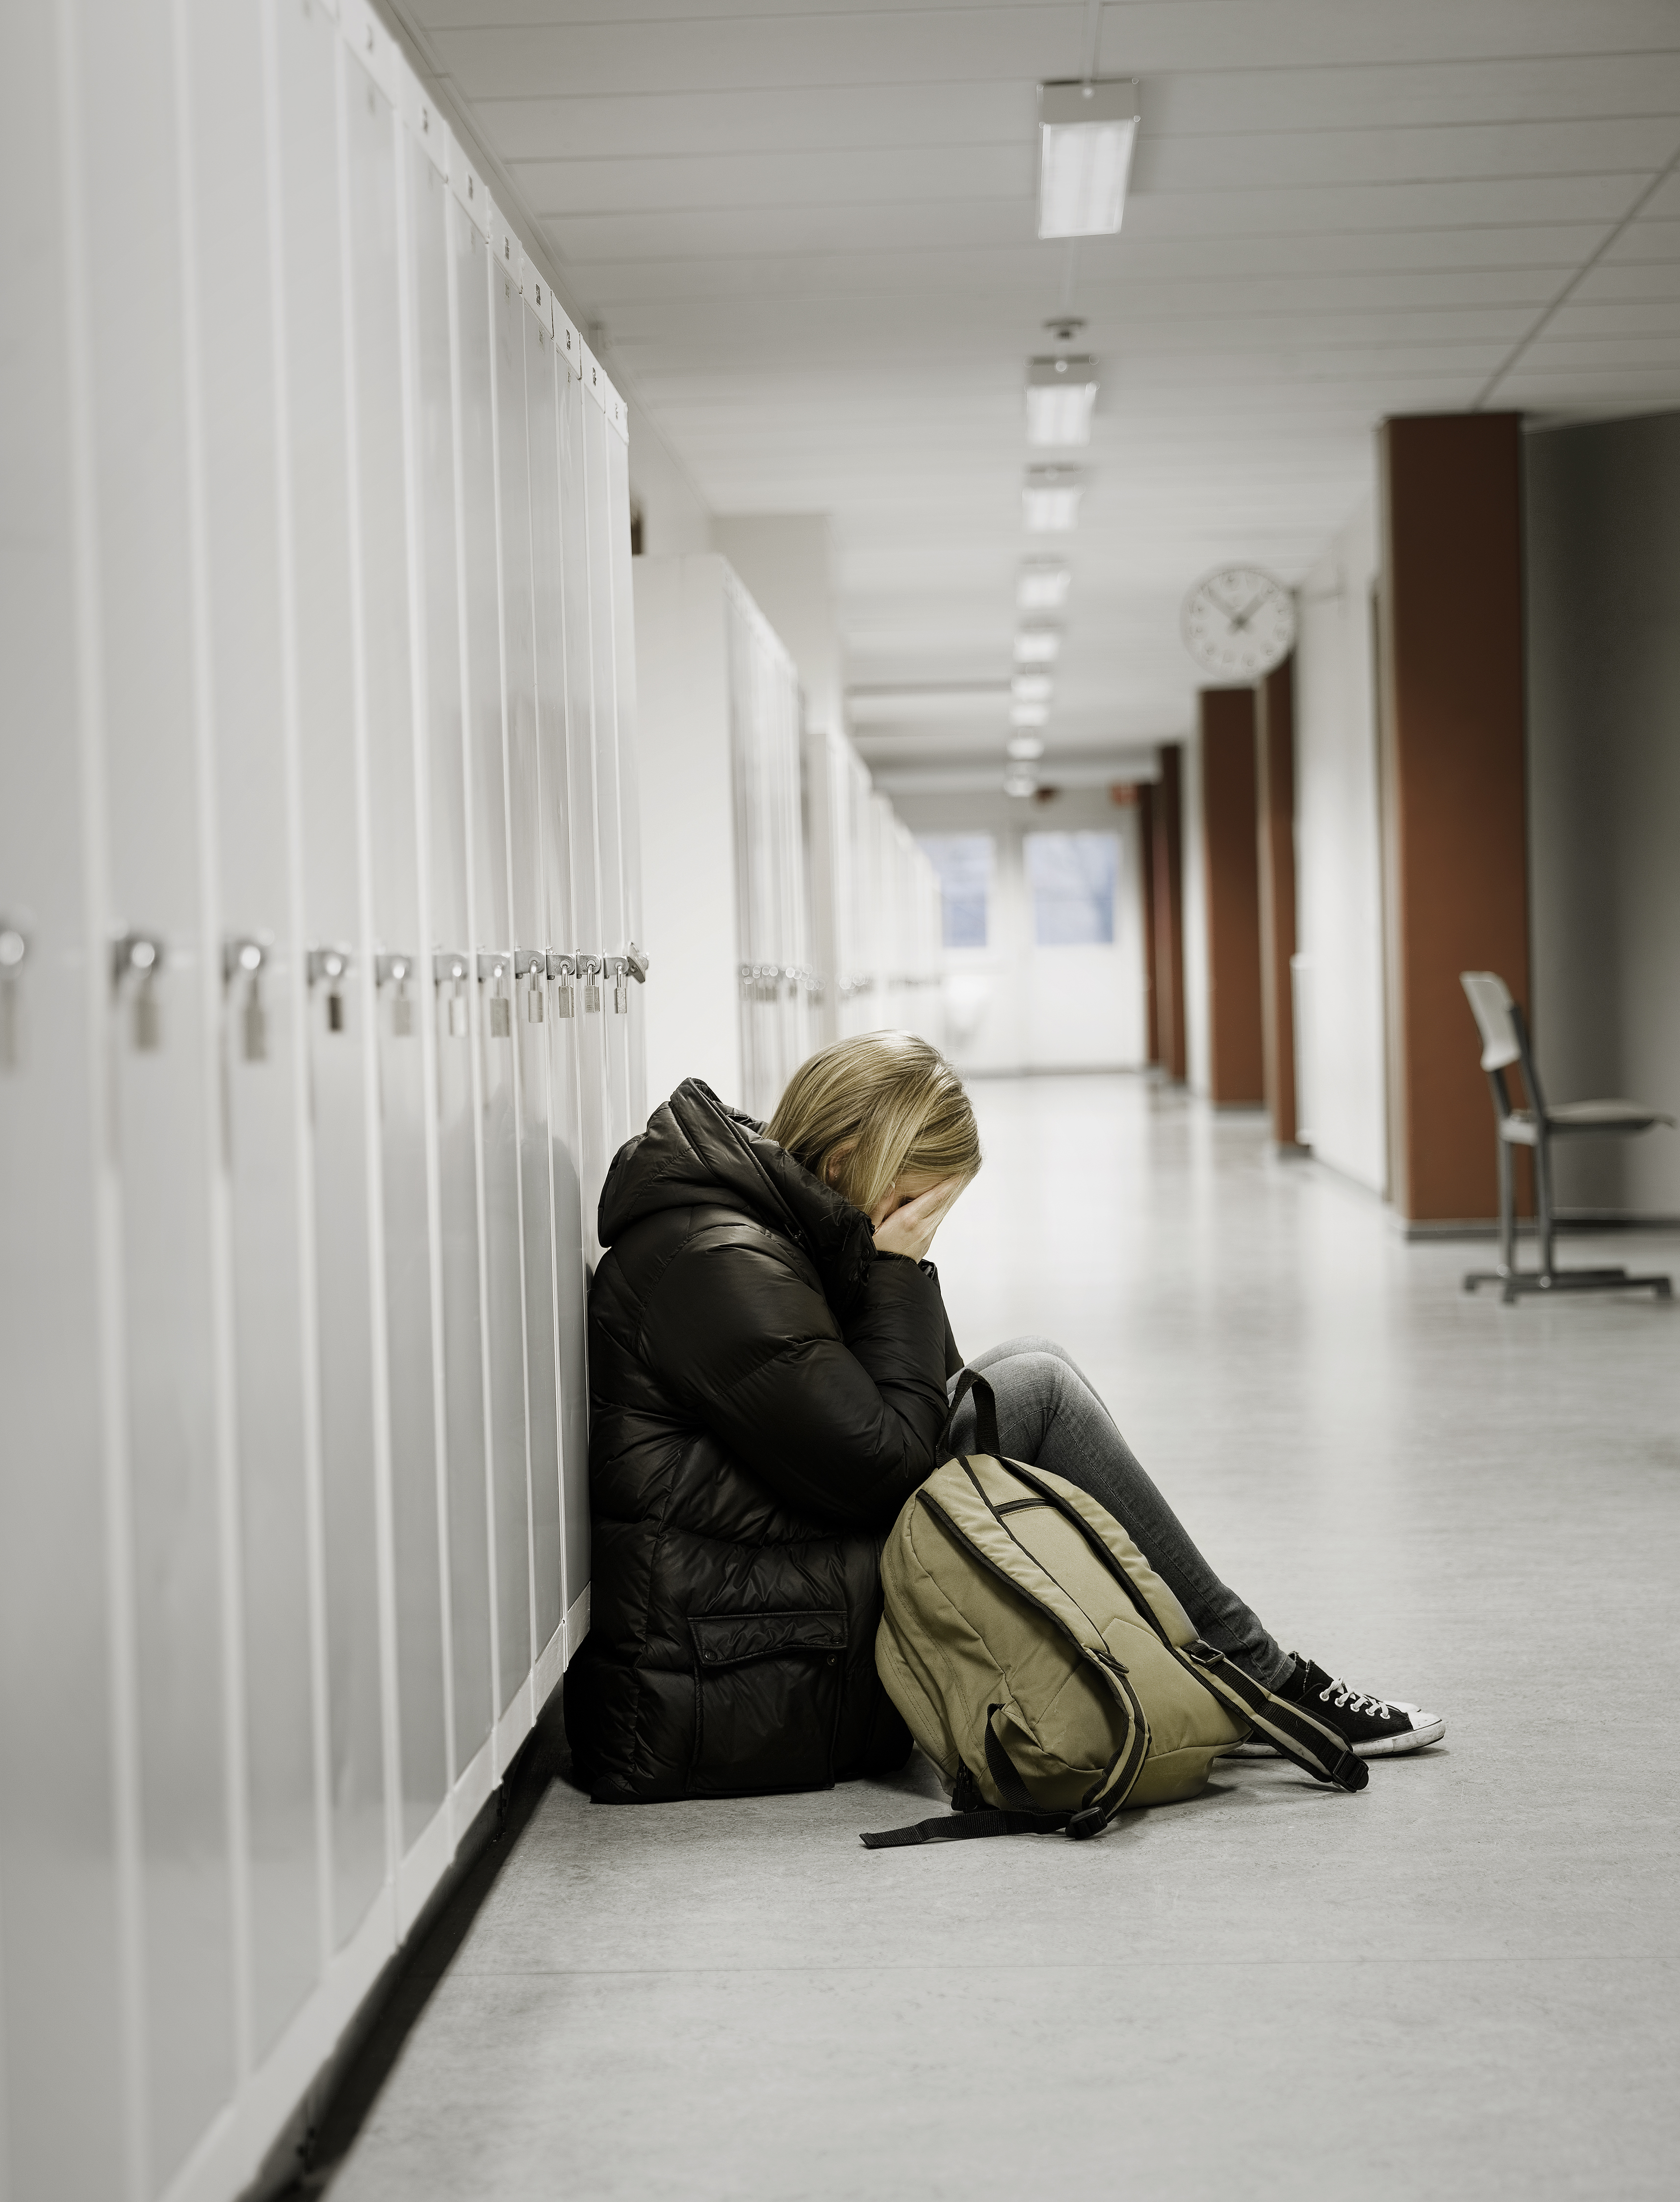 Young woman crying by the lockers at school. | Source: Shutterstock